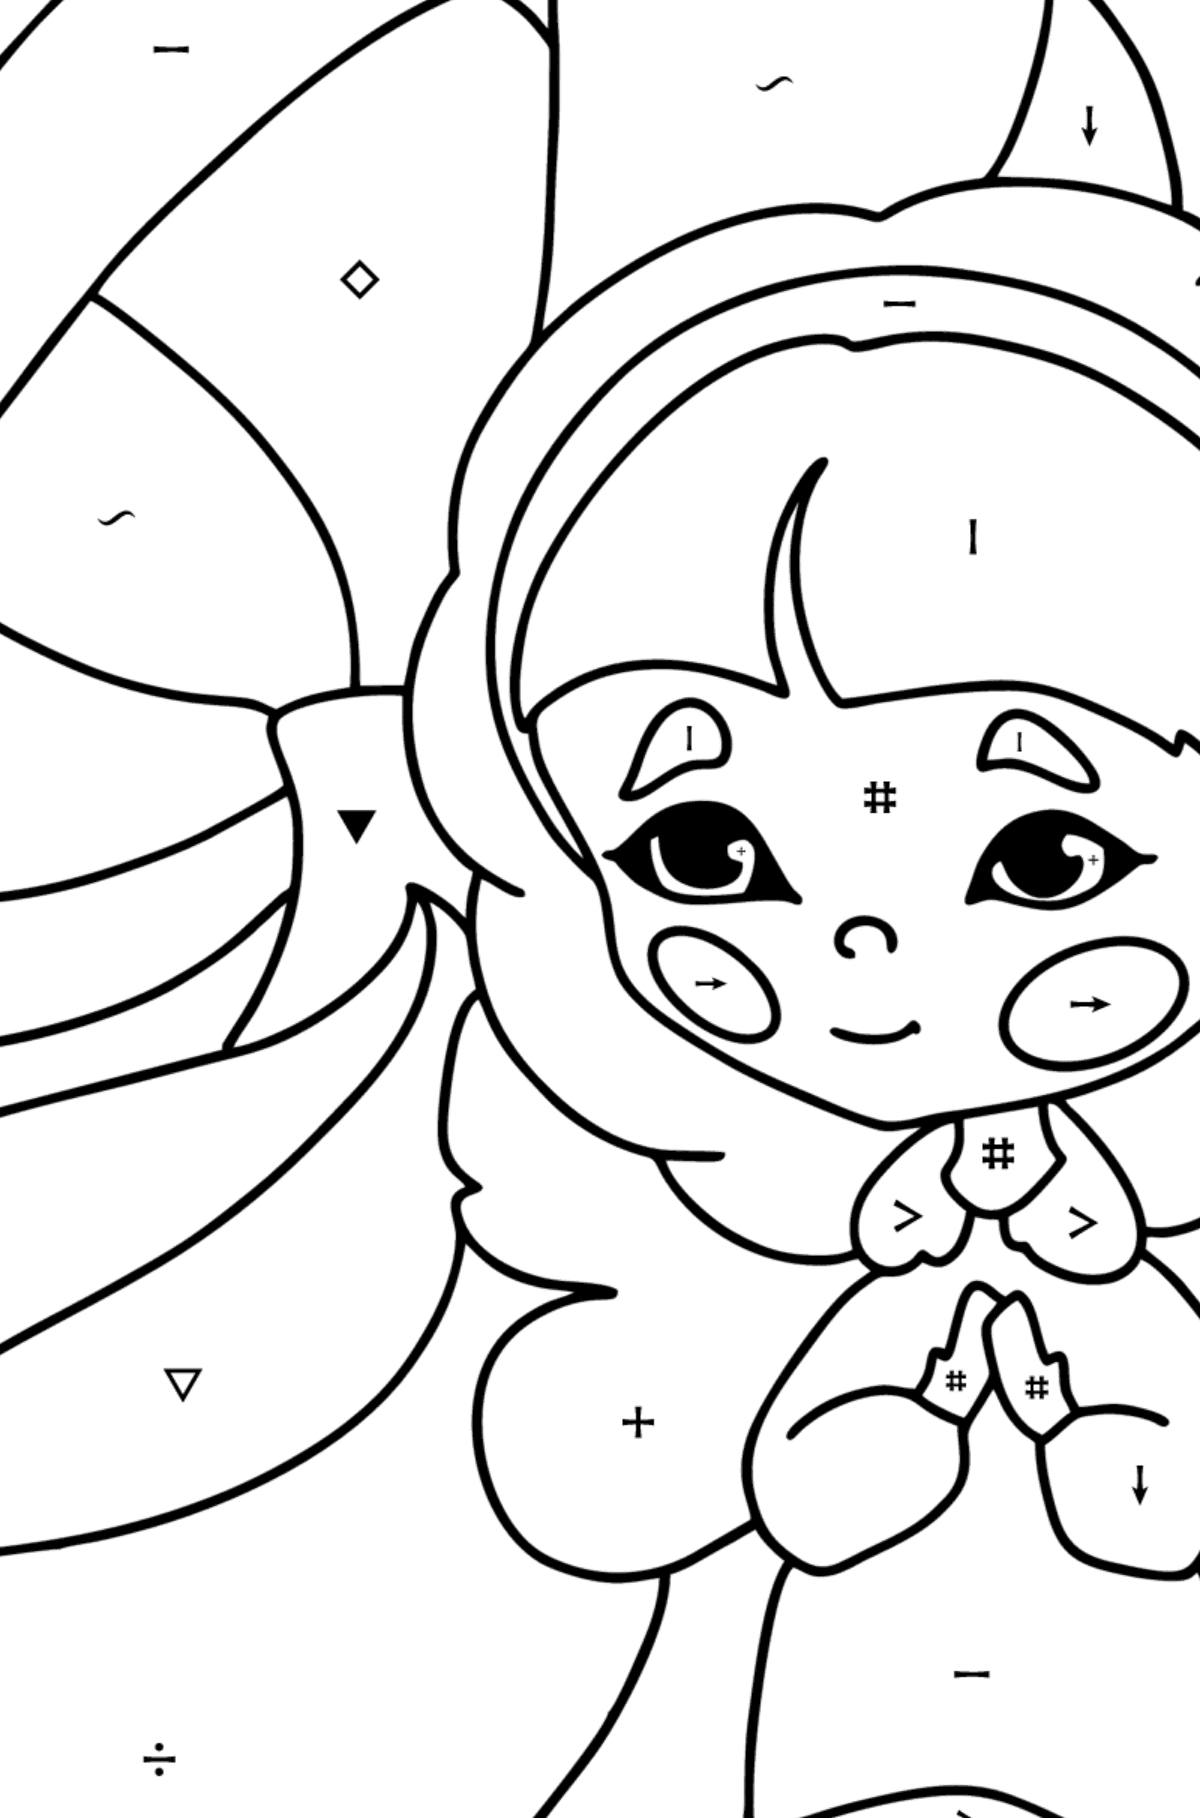 fairy and mushroom coloring page - Coloring by Symbols for Kids